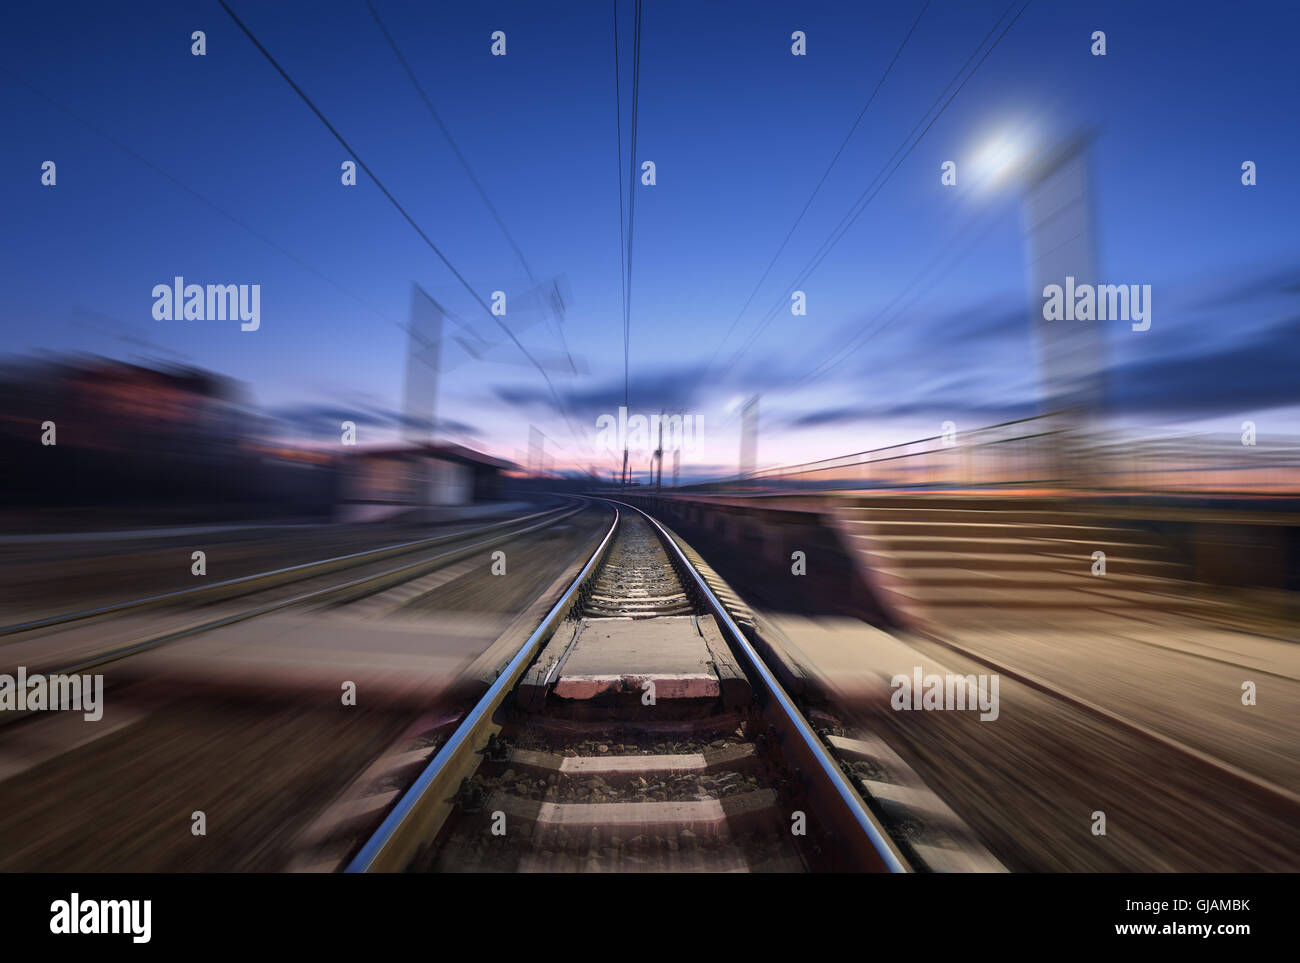 Railway platform with motion blur effect on the background of blue sky at night. Railway station. Railroad Stock Photo